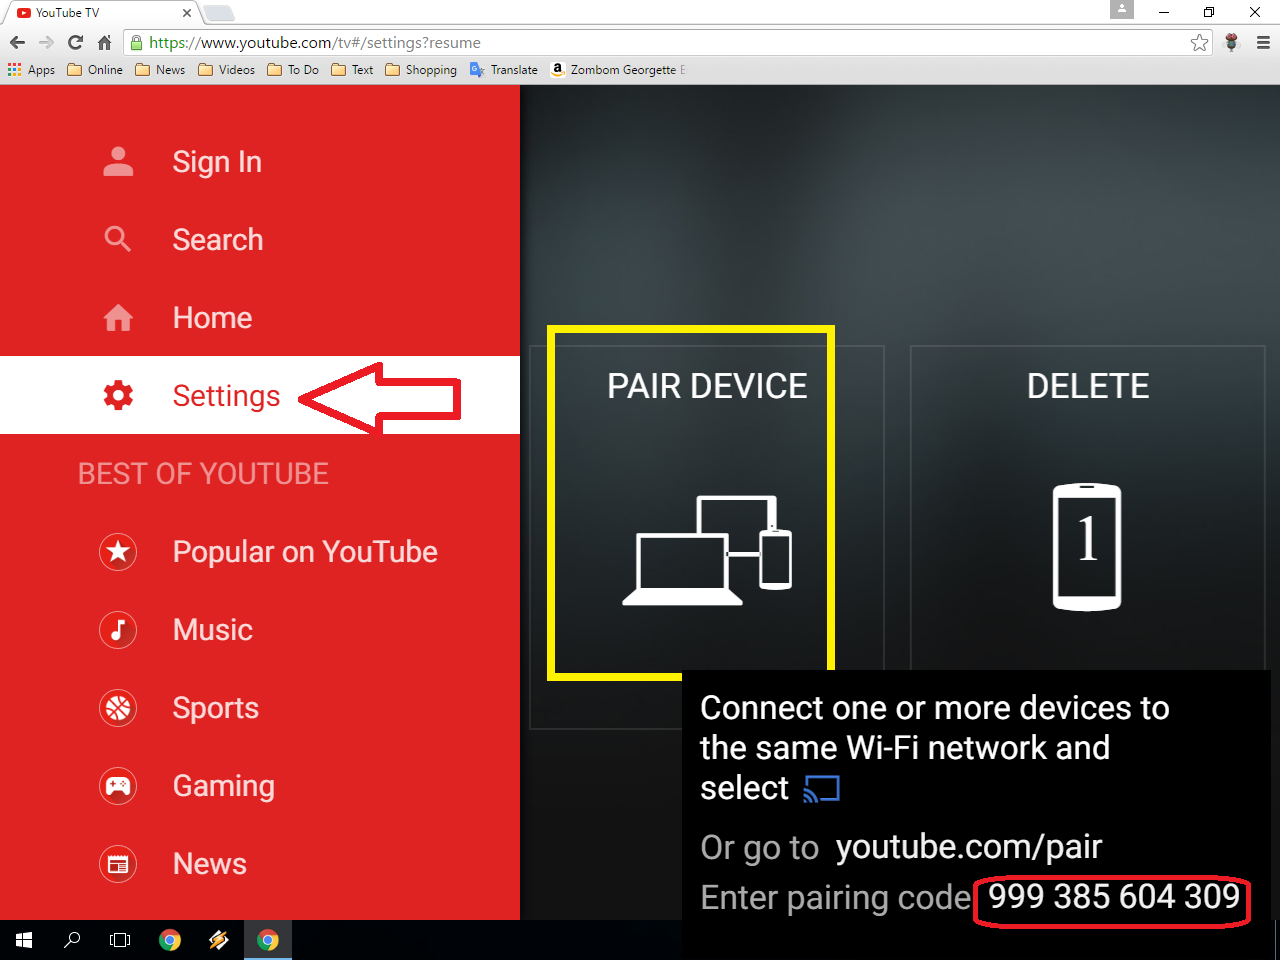 How to Activate You tube Using tv  com start enter code